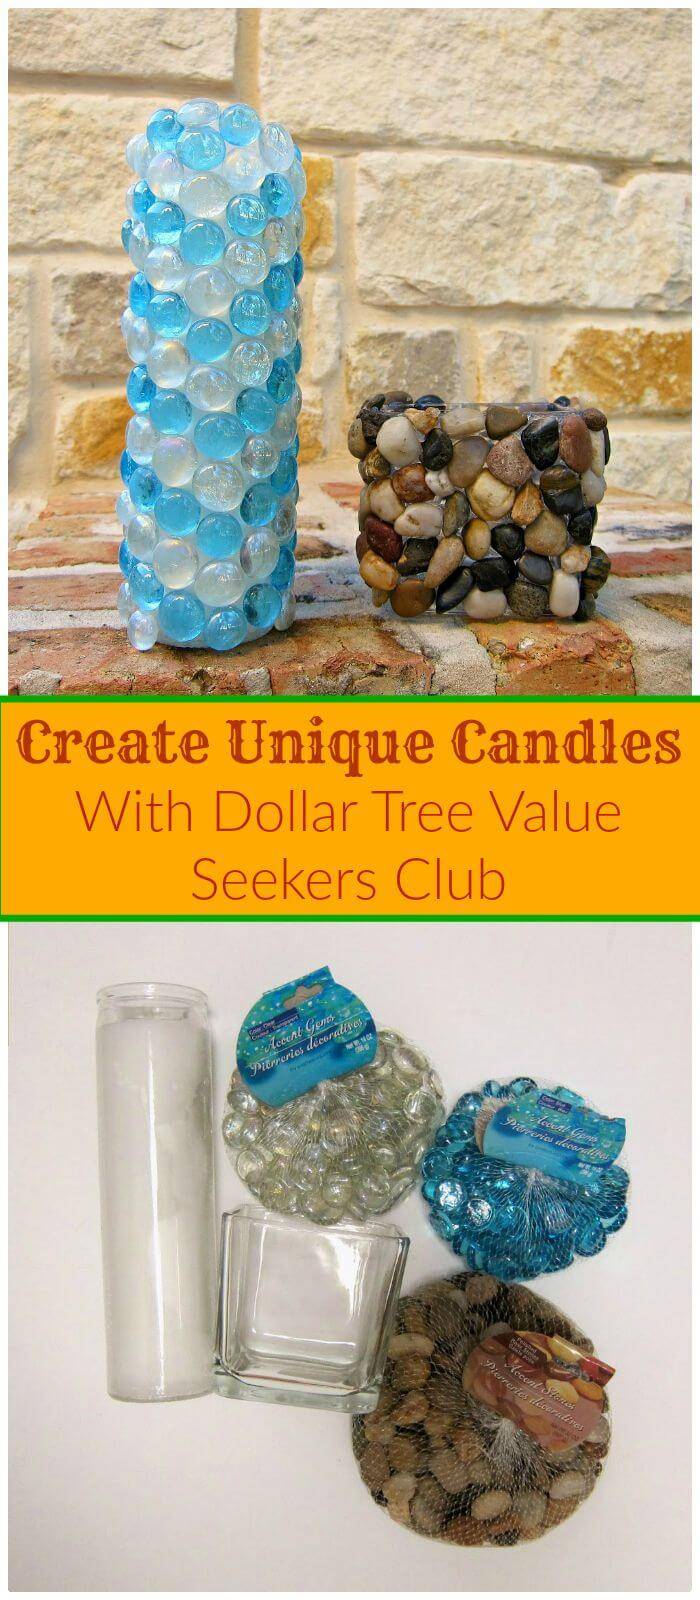 Create Unique Candles With Dollar Tree Value